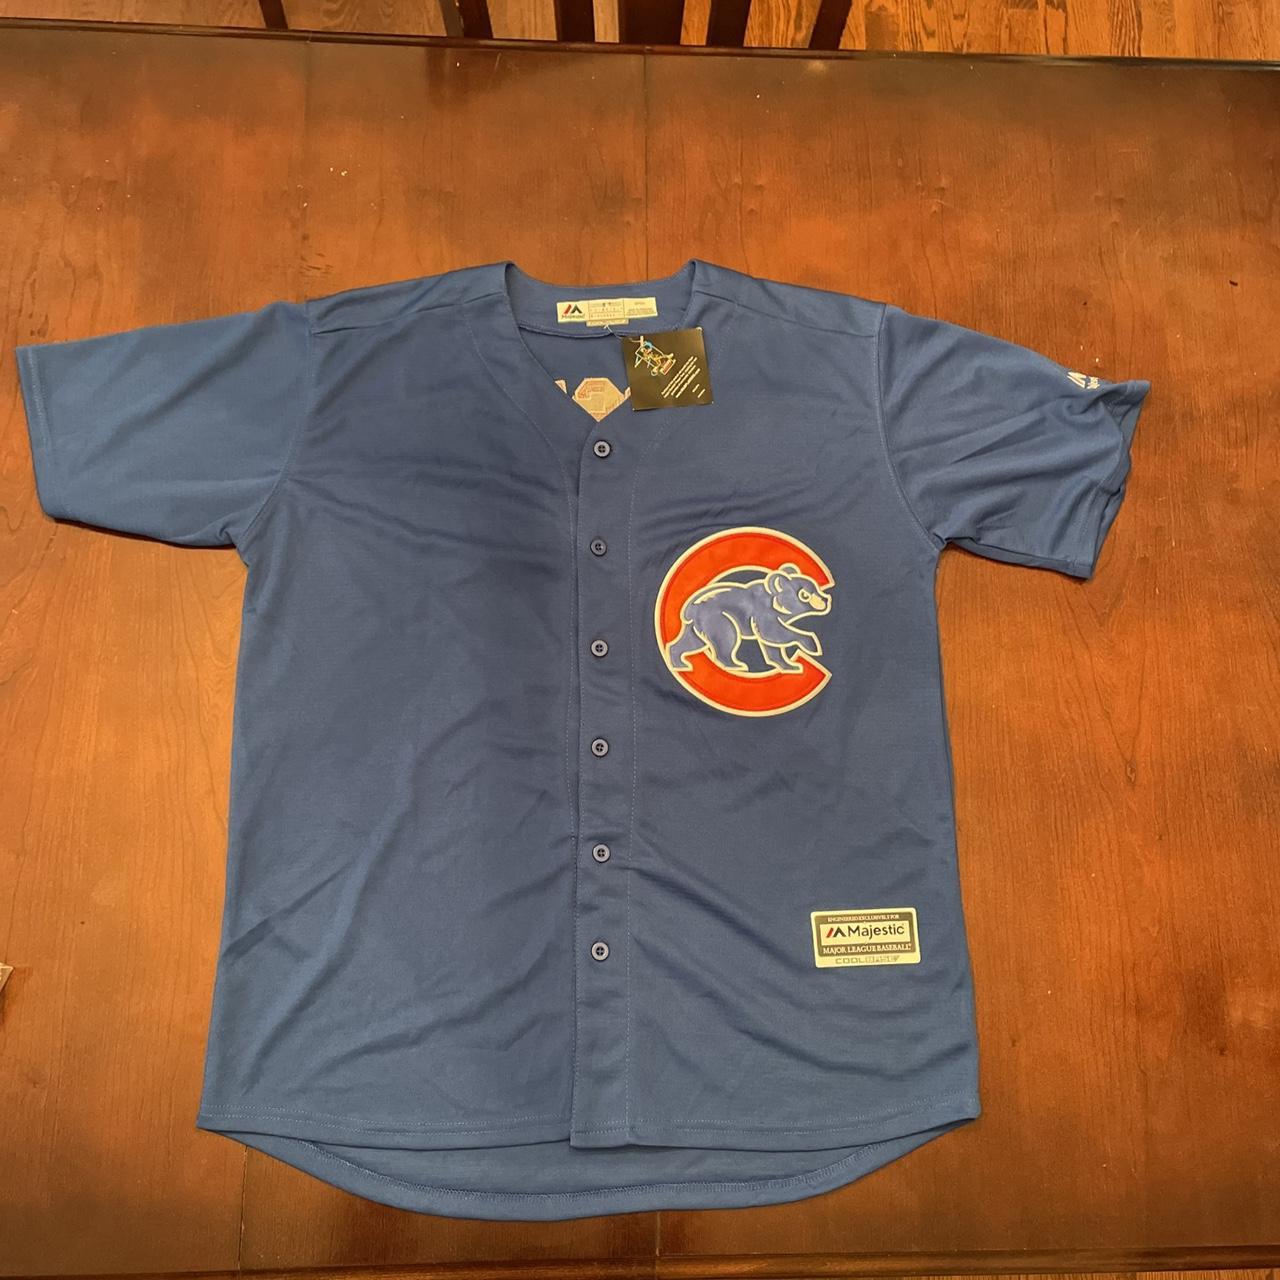 Official Addison Russell Chicago Cubs Jersey, Addison Russell Shirts, Cubs  Apparel, Addison Russell Gear